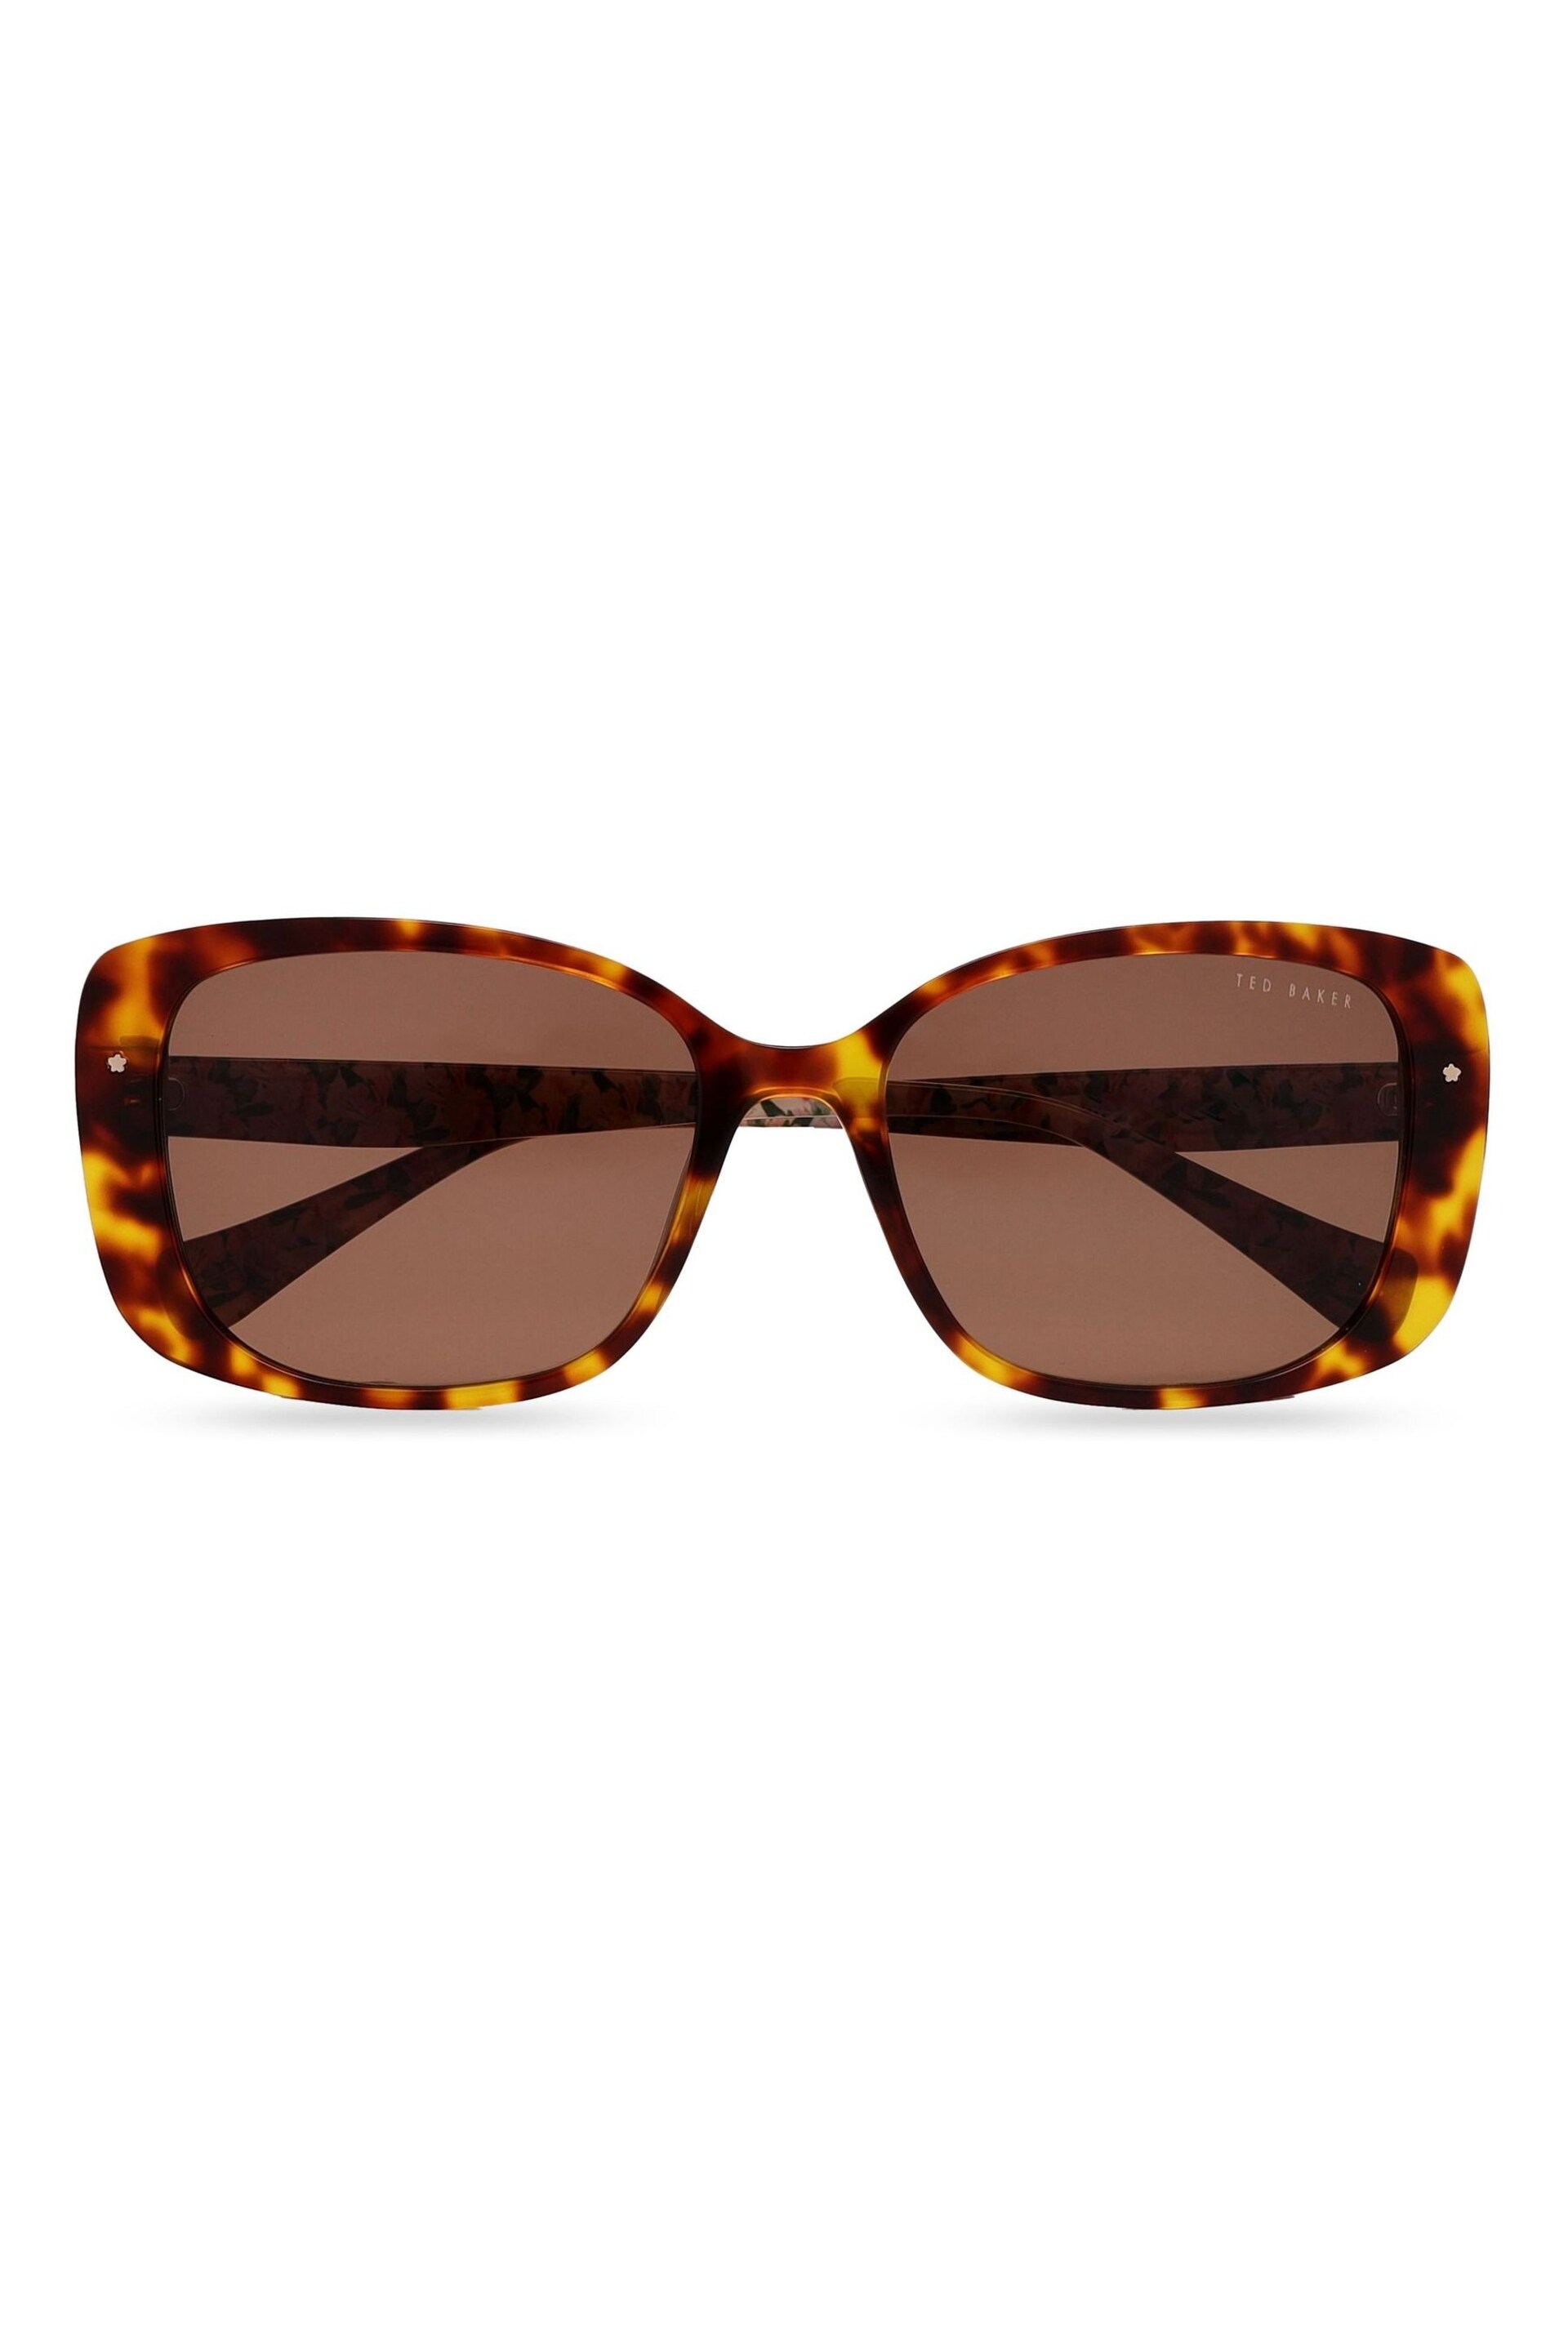 Ted Baker Brown Penelope Sunglasses - Image 2 of 5